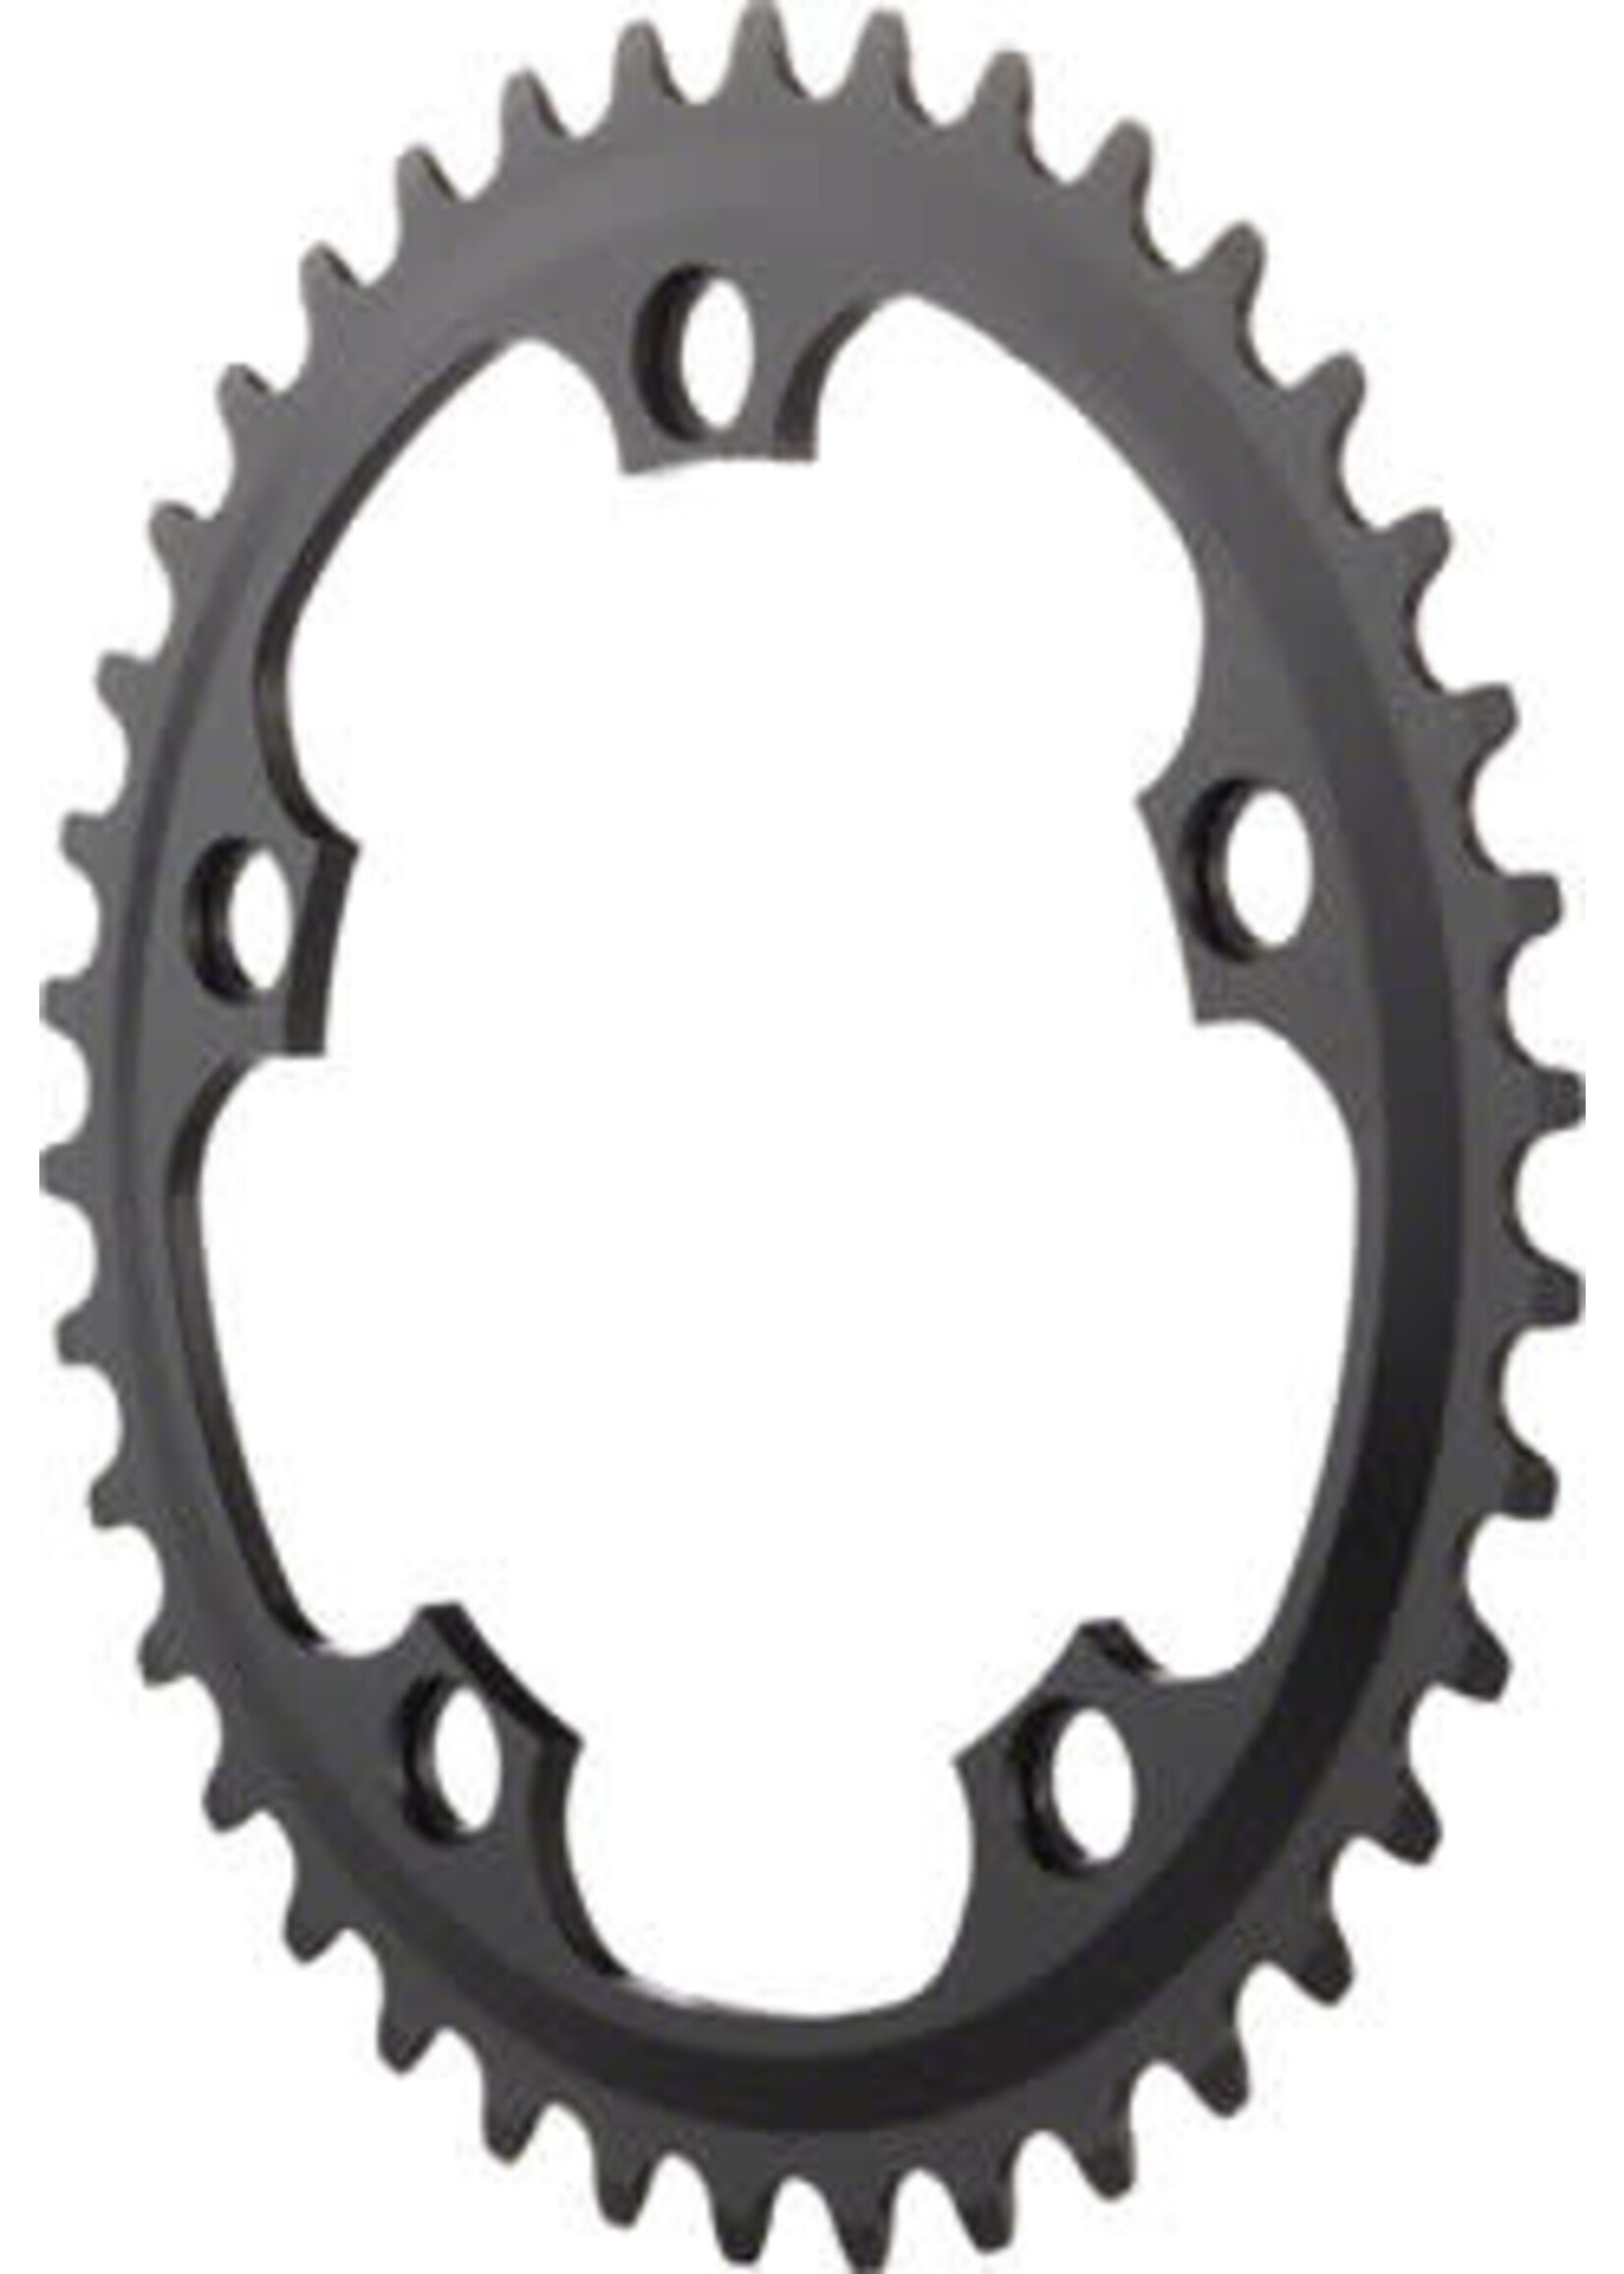 Dimension Dimension Chainring - 38T, 110mm BCD, Middle, Black